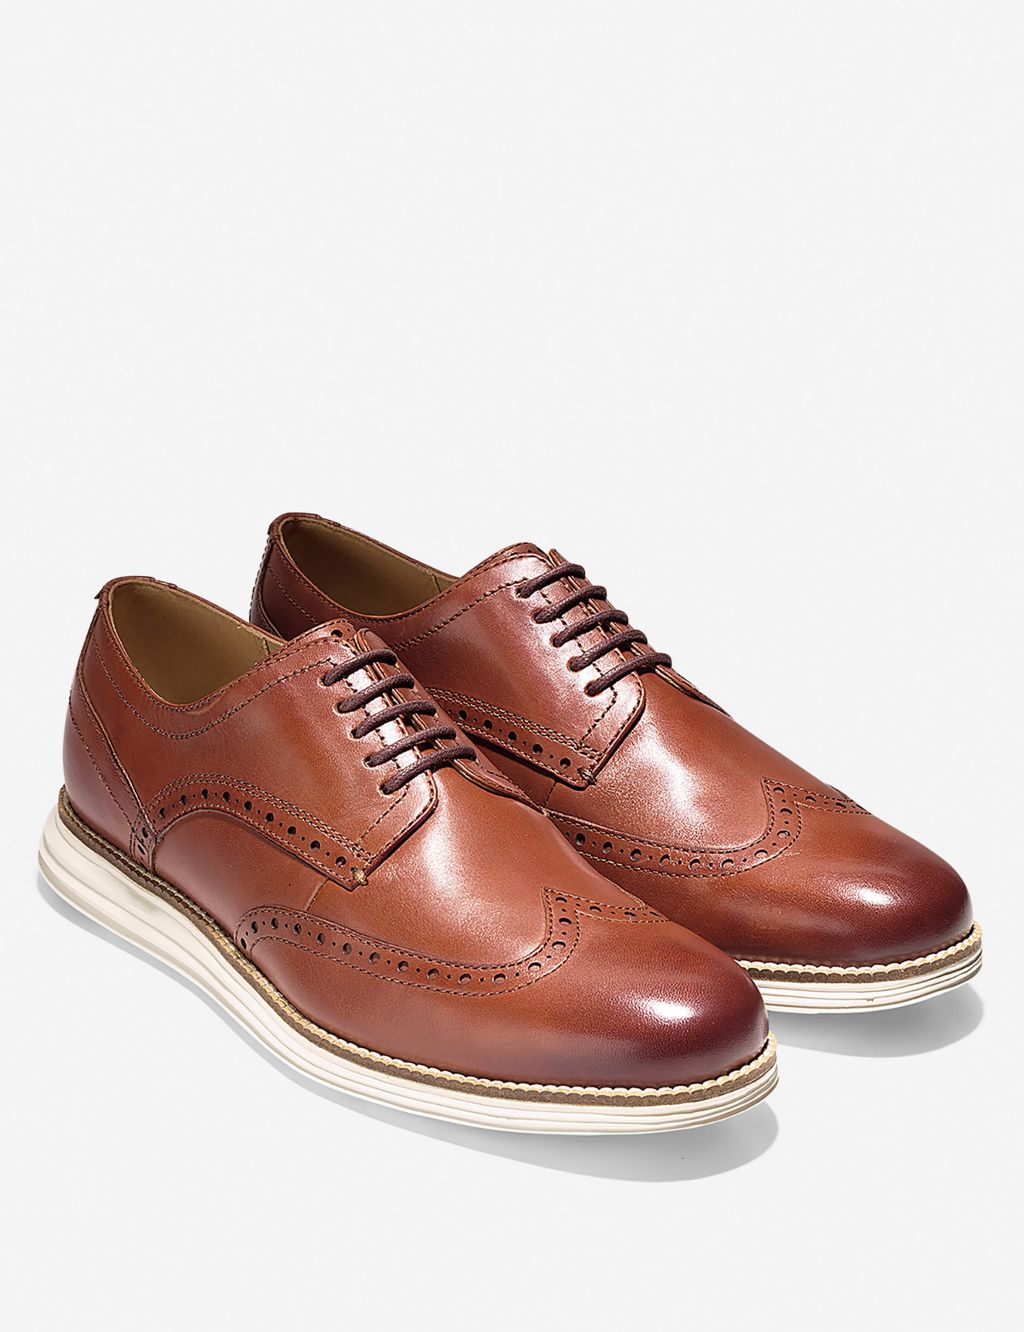 Originalgrand Leather Oxford Shoes 1 of 5